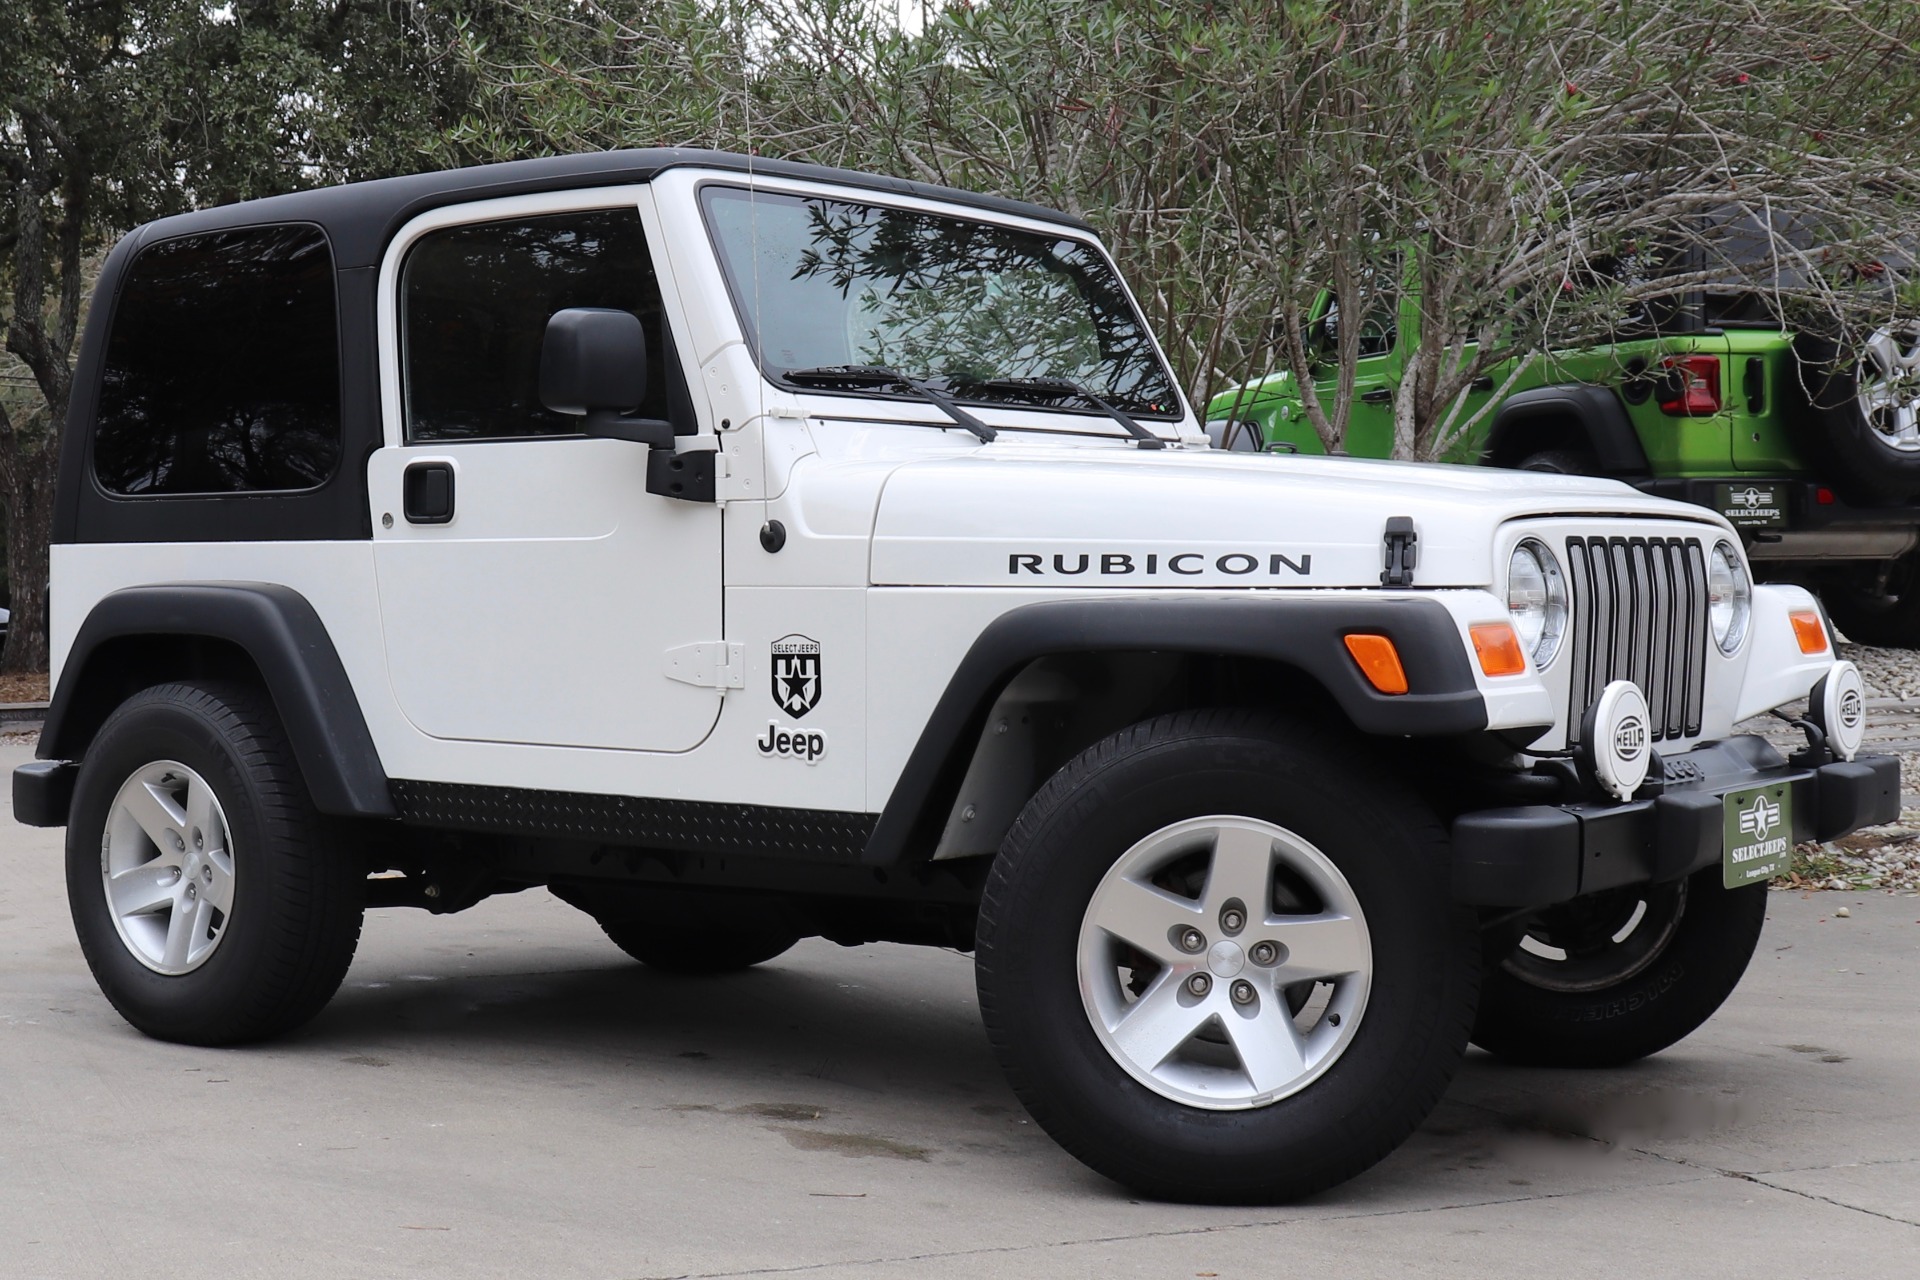 Used 2003 Jeep Wrangler Rubicon For Sale ($18,995) | Select Jeeps Inc.  Stock #338812